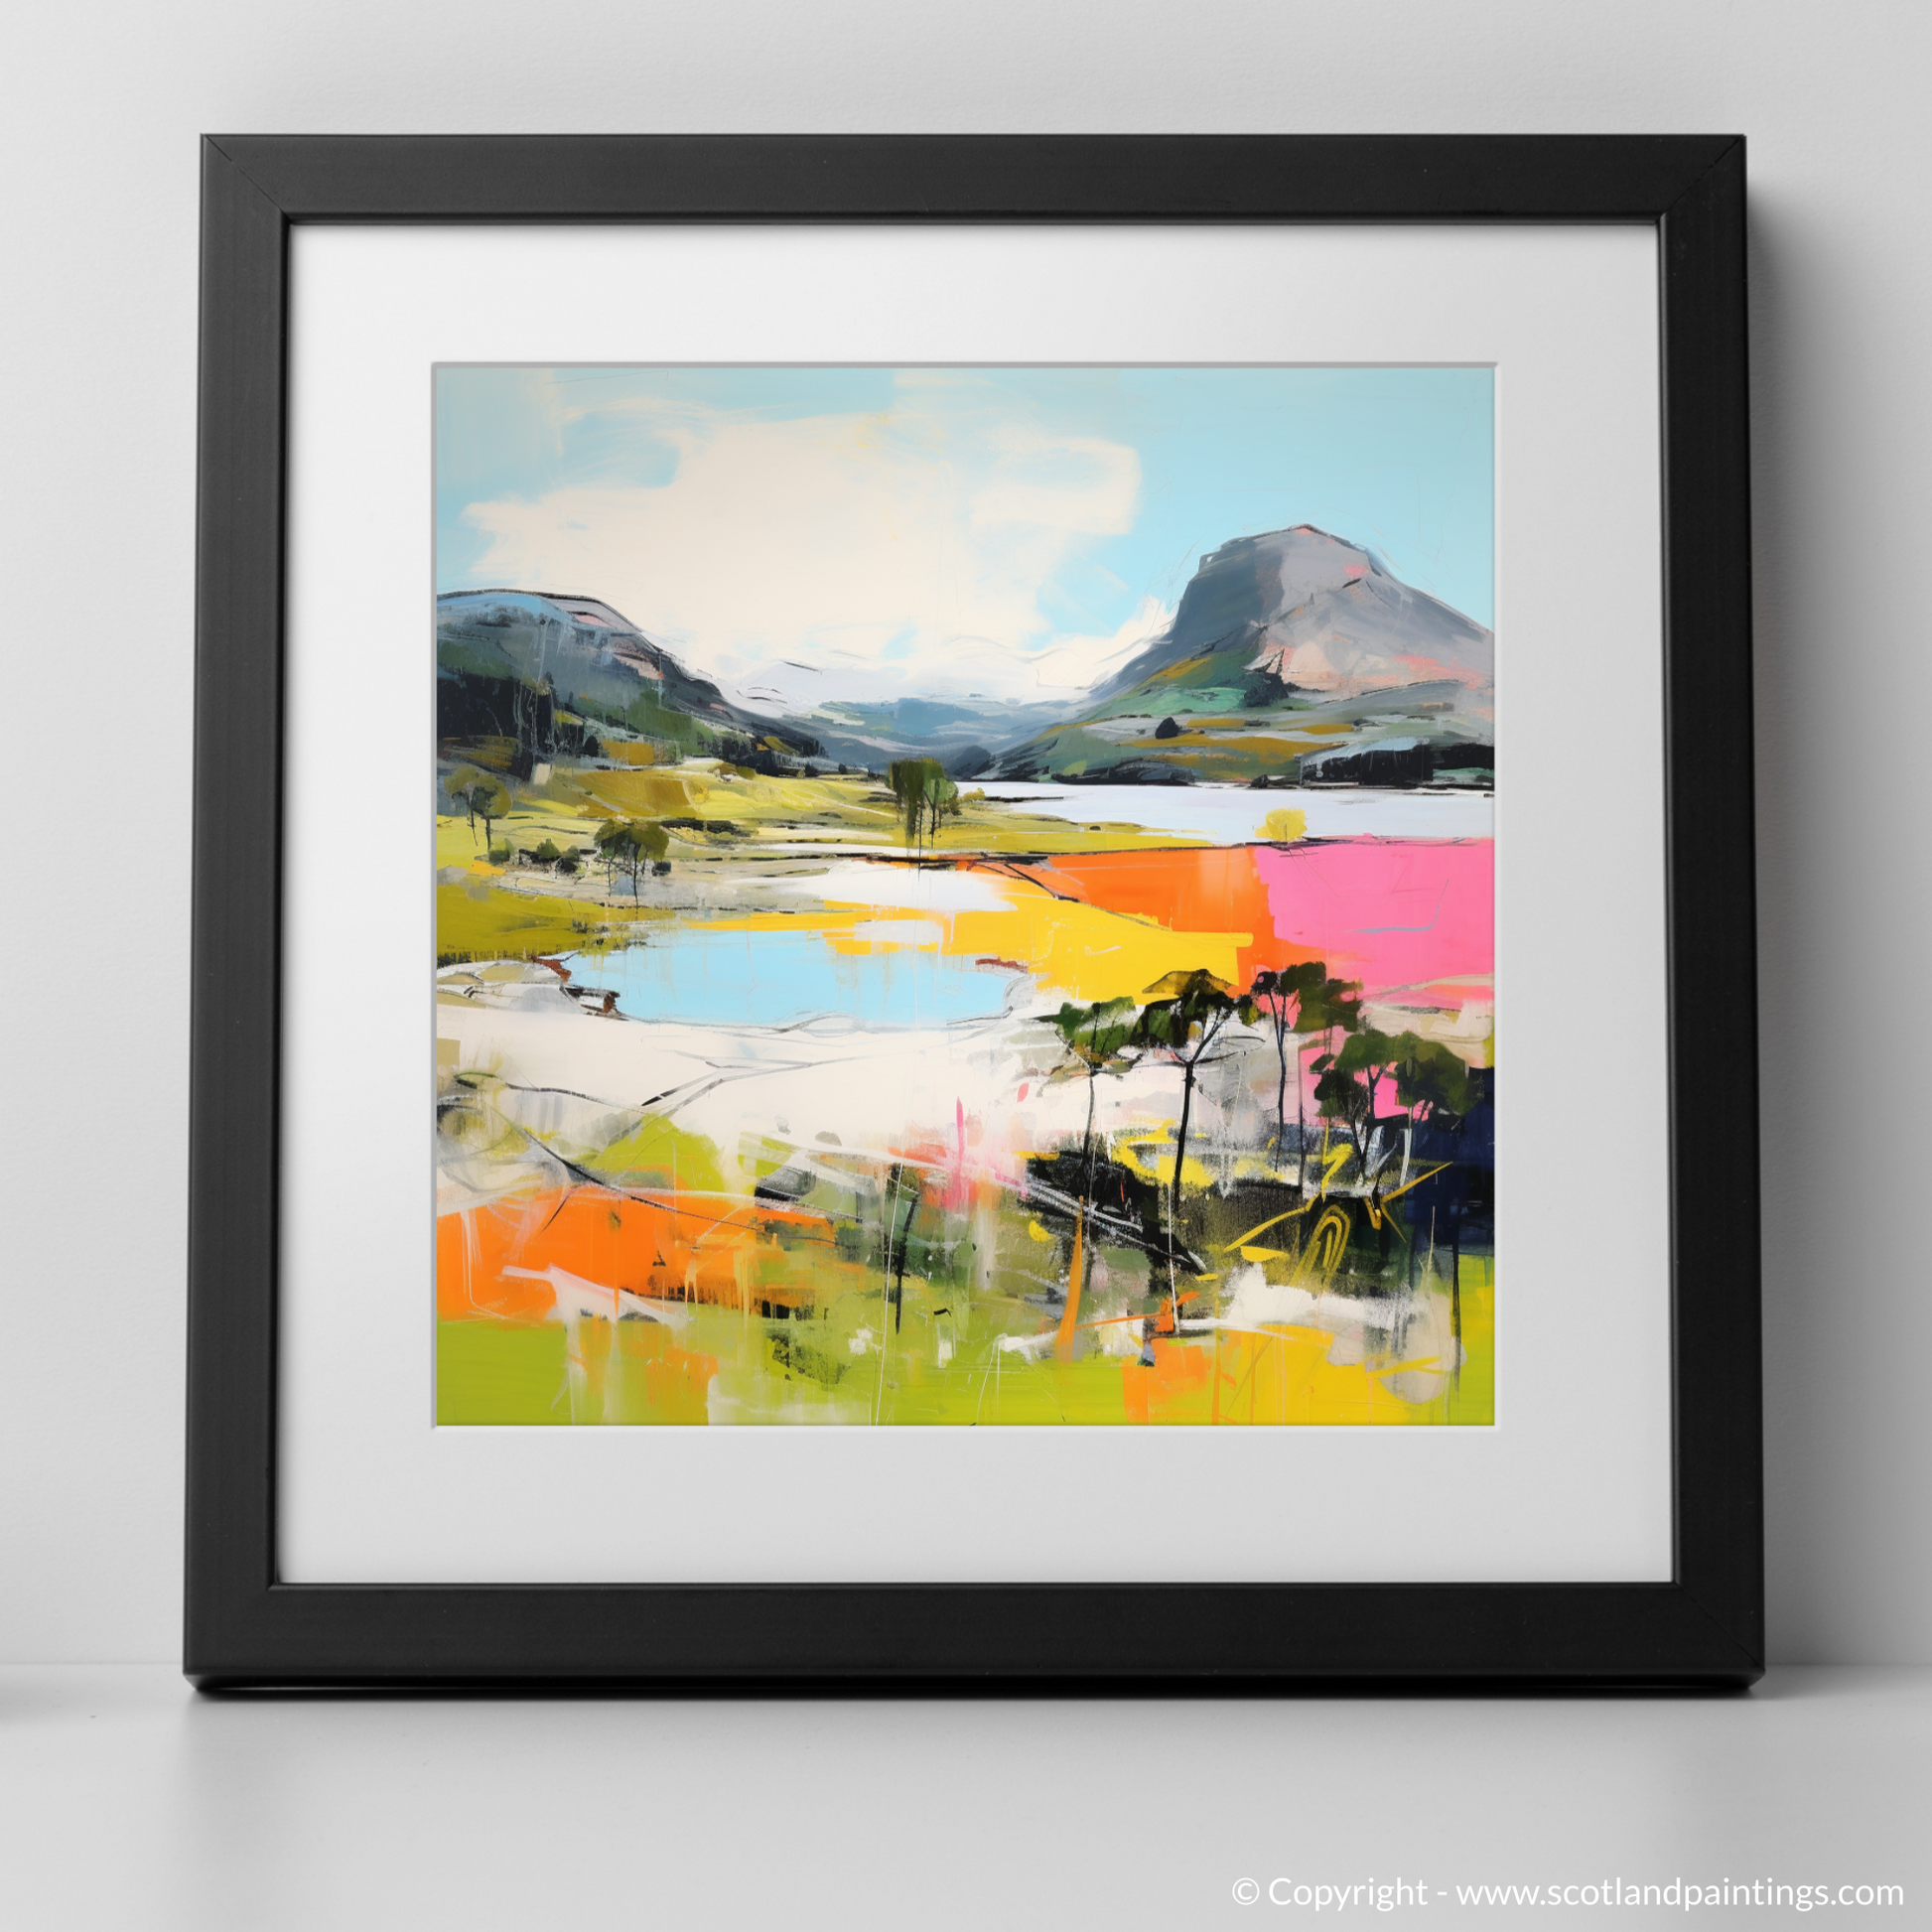 Art Print of Loch Maree, Wester Ross in summer with a black frame